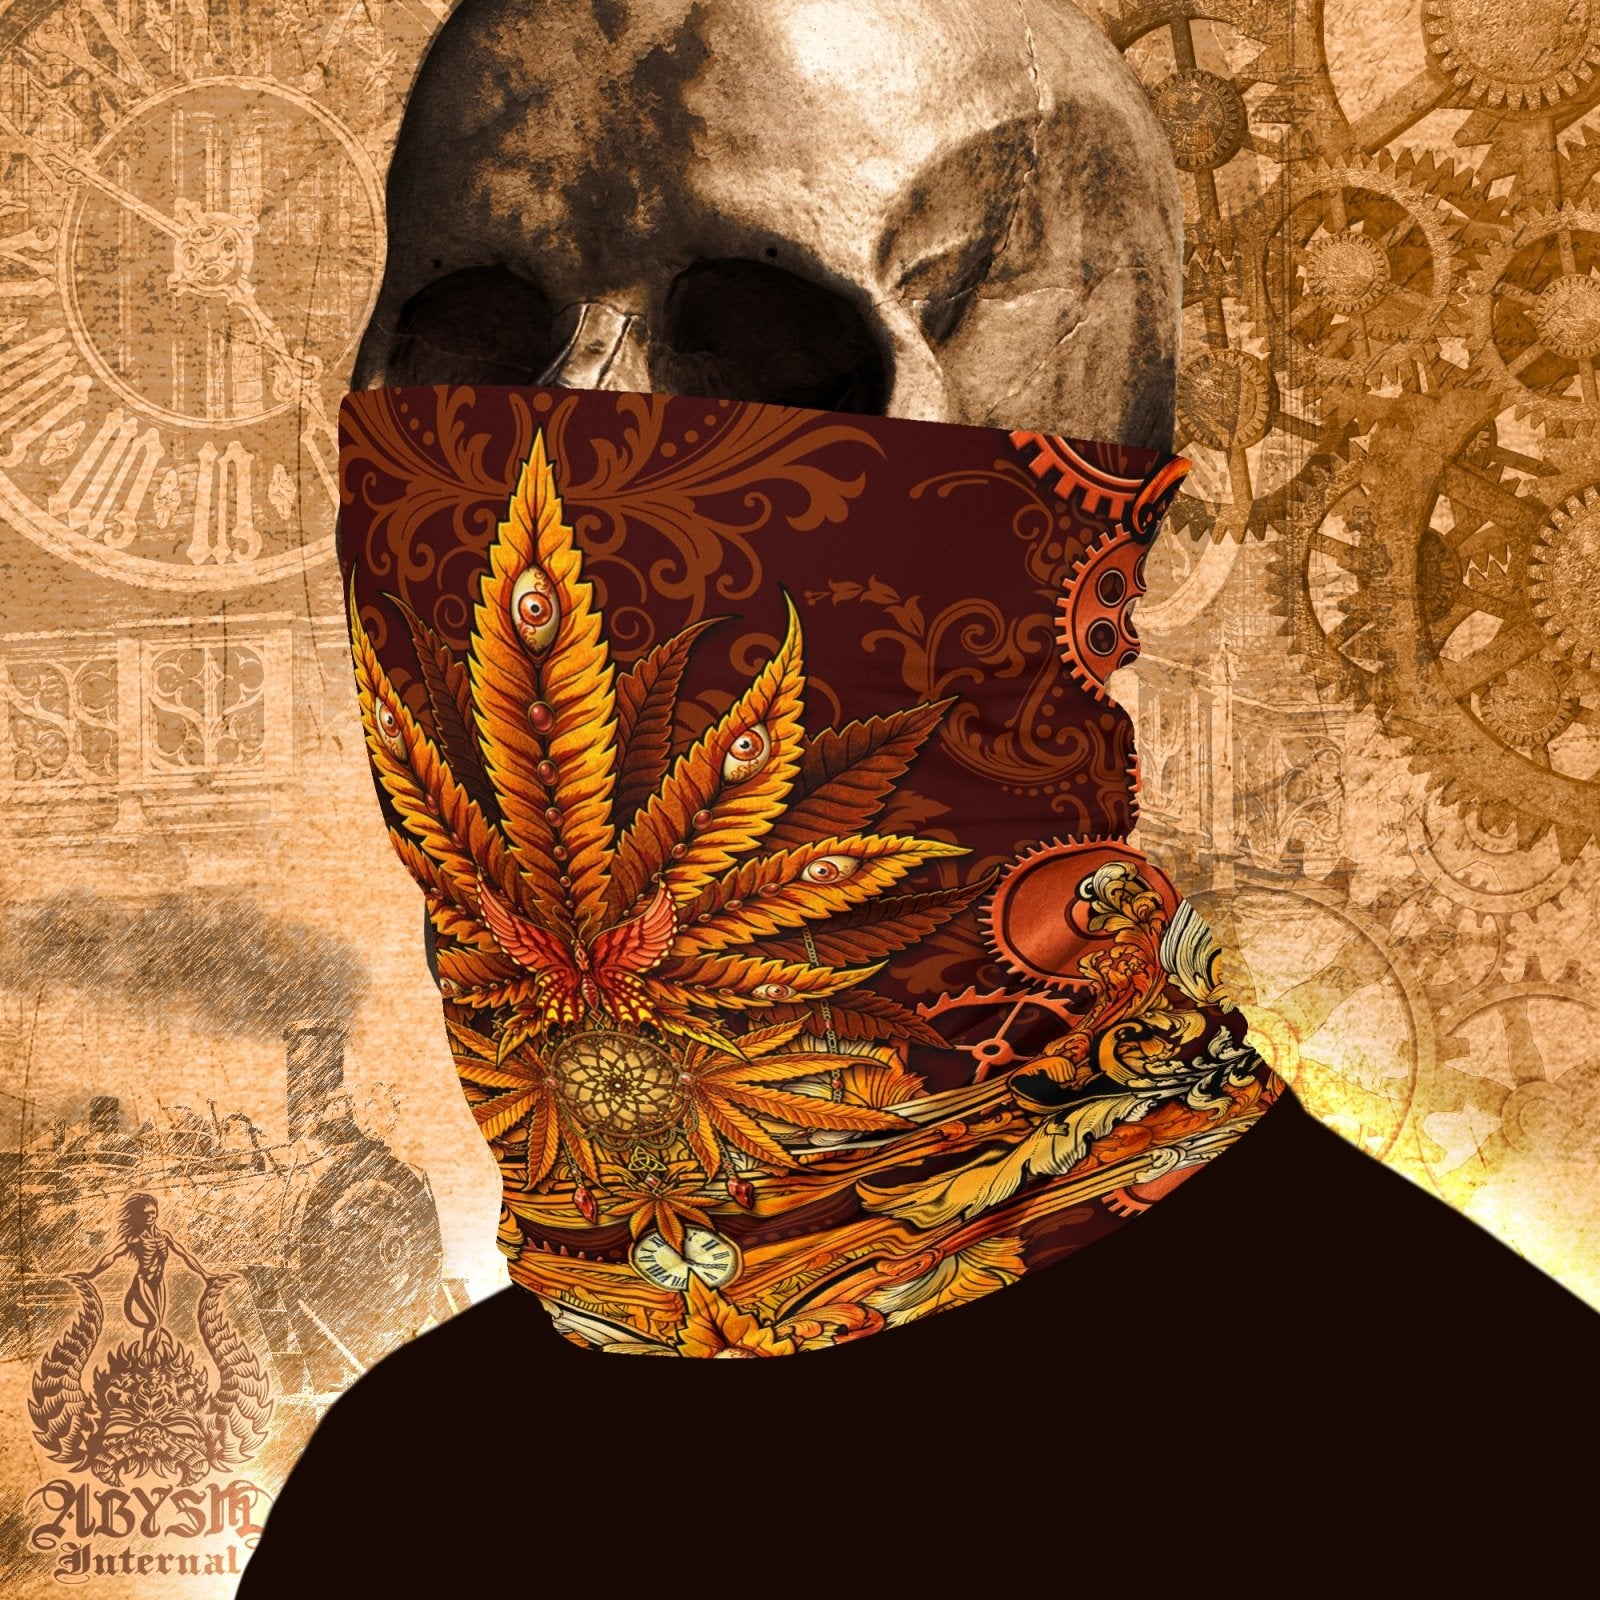 Cannabis Neck Gaiter, Weed Face Mask, Marijuana Head Covering, Outdoors Festival Outfit, 420 Gift - Steampunk - Abysm Internal